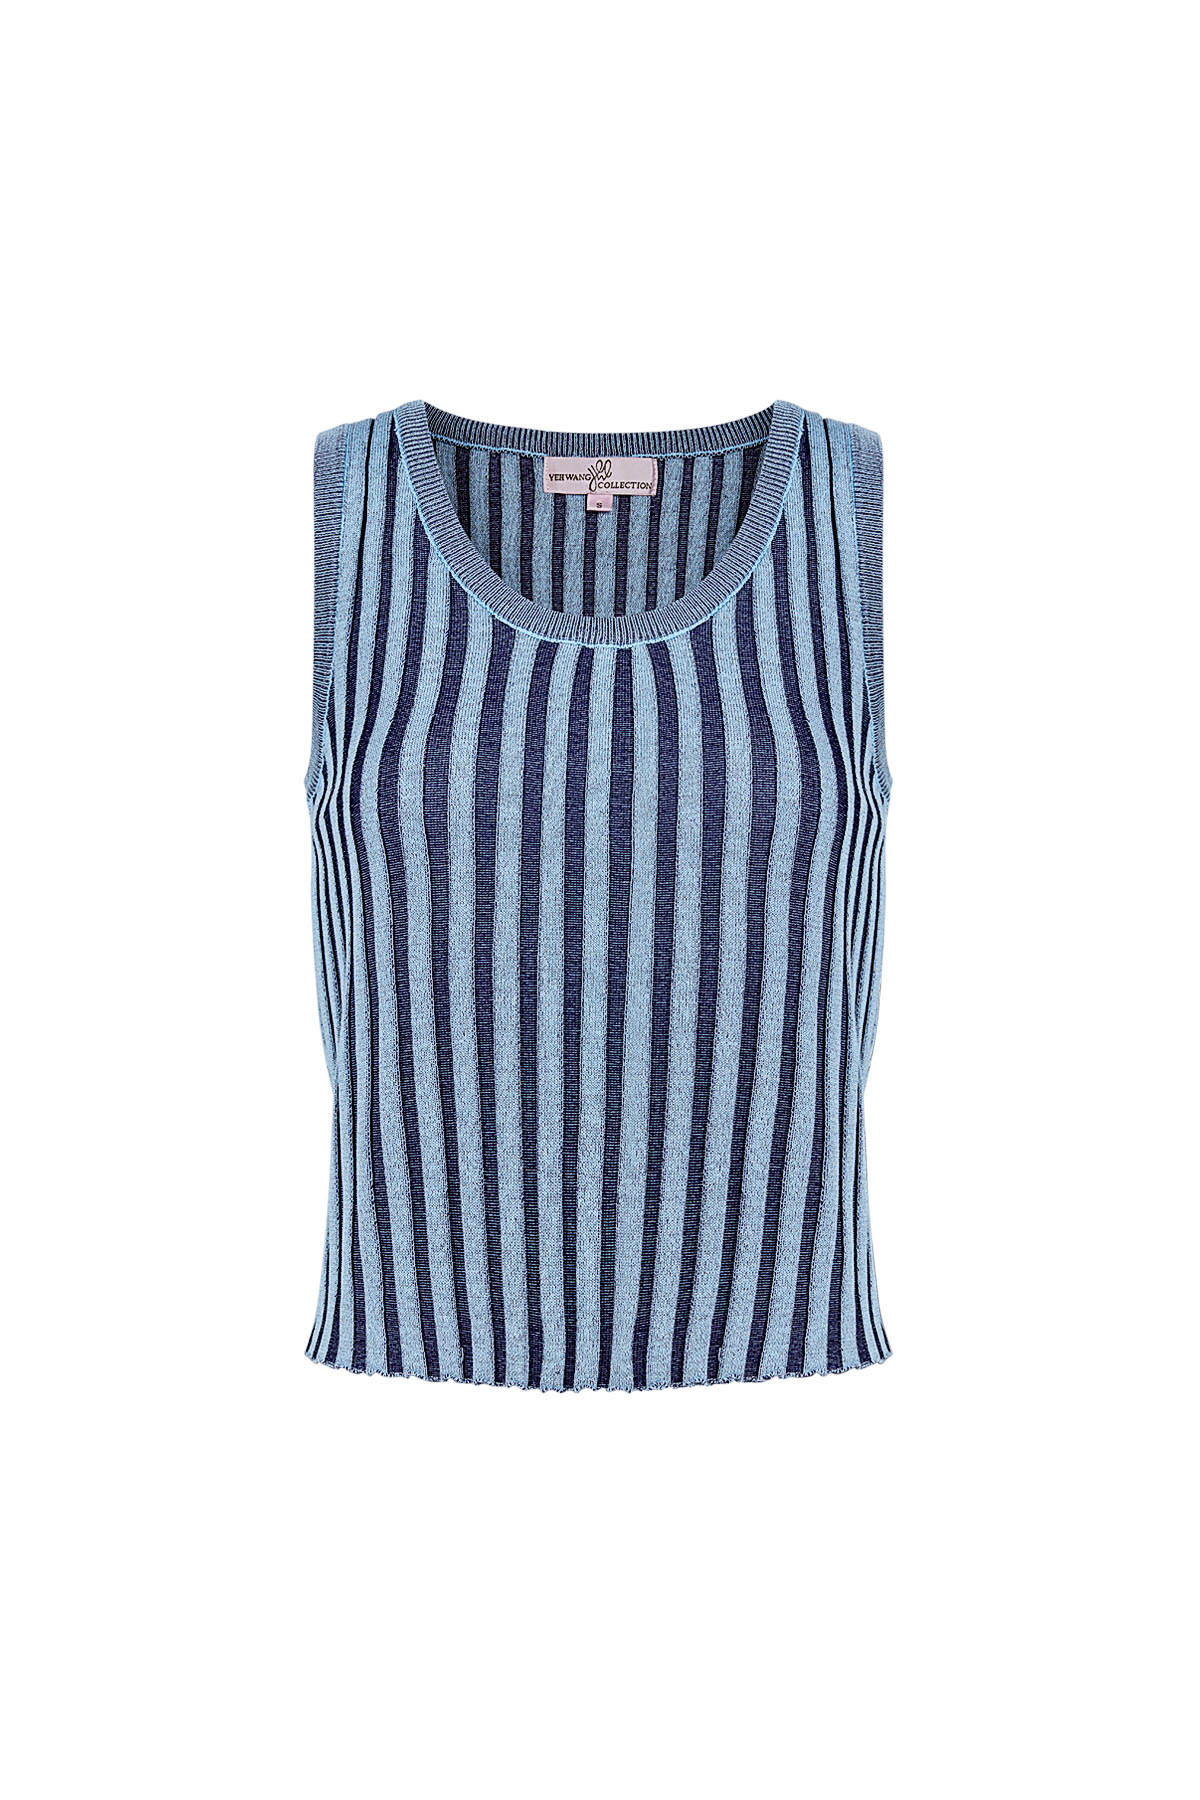 Sleeveless, striped top small – blue 